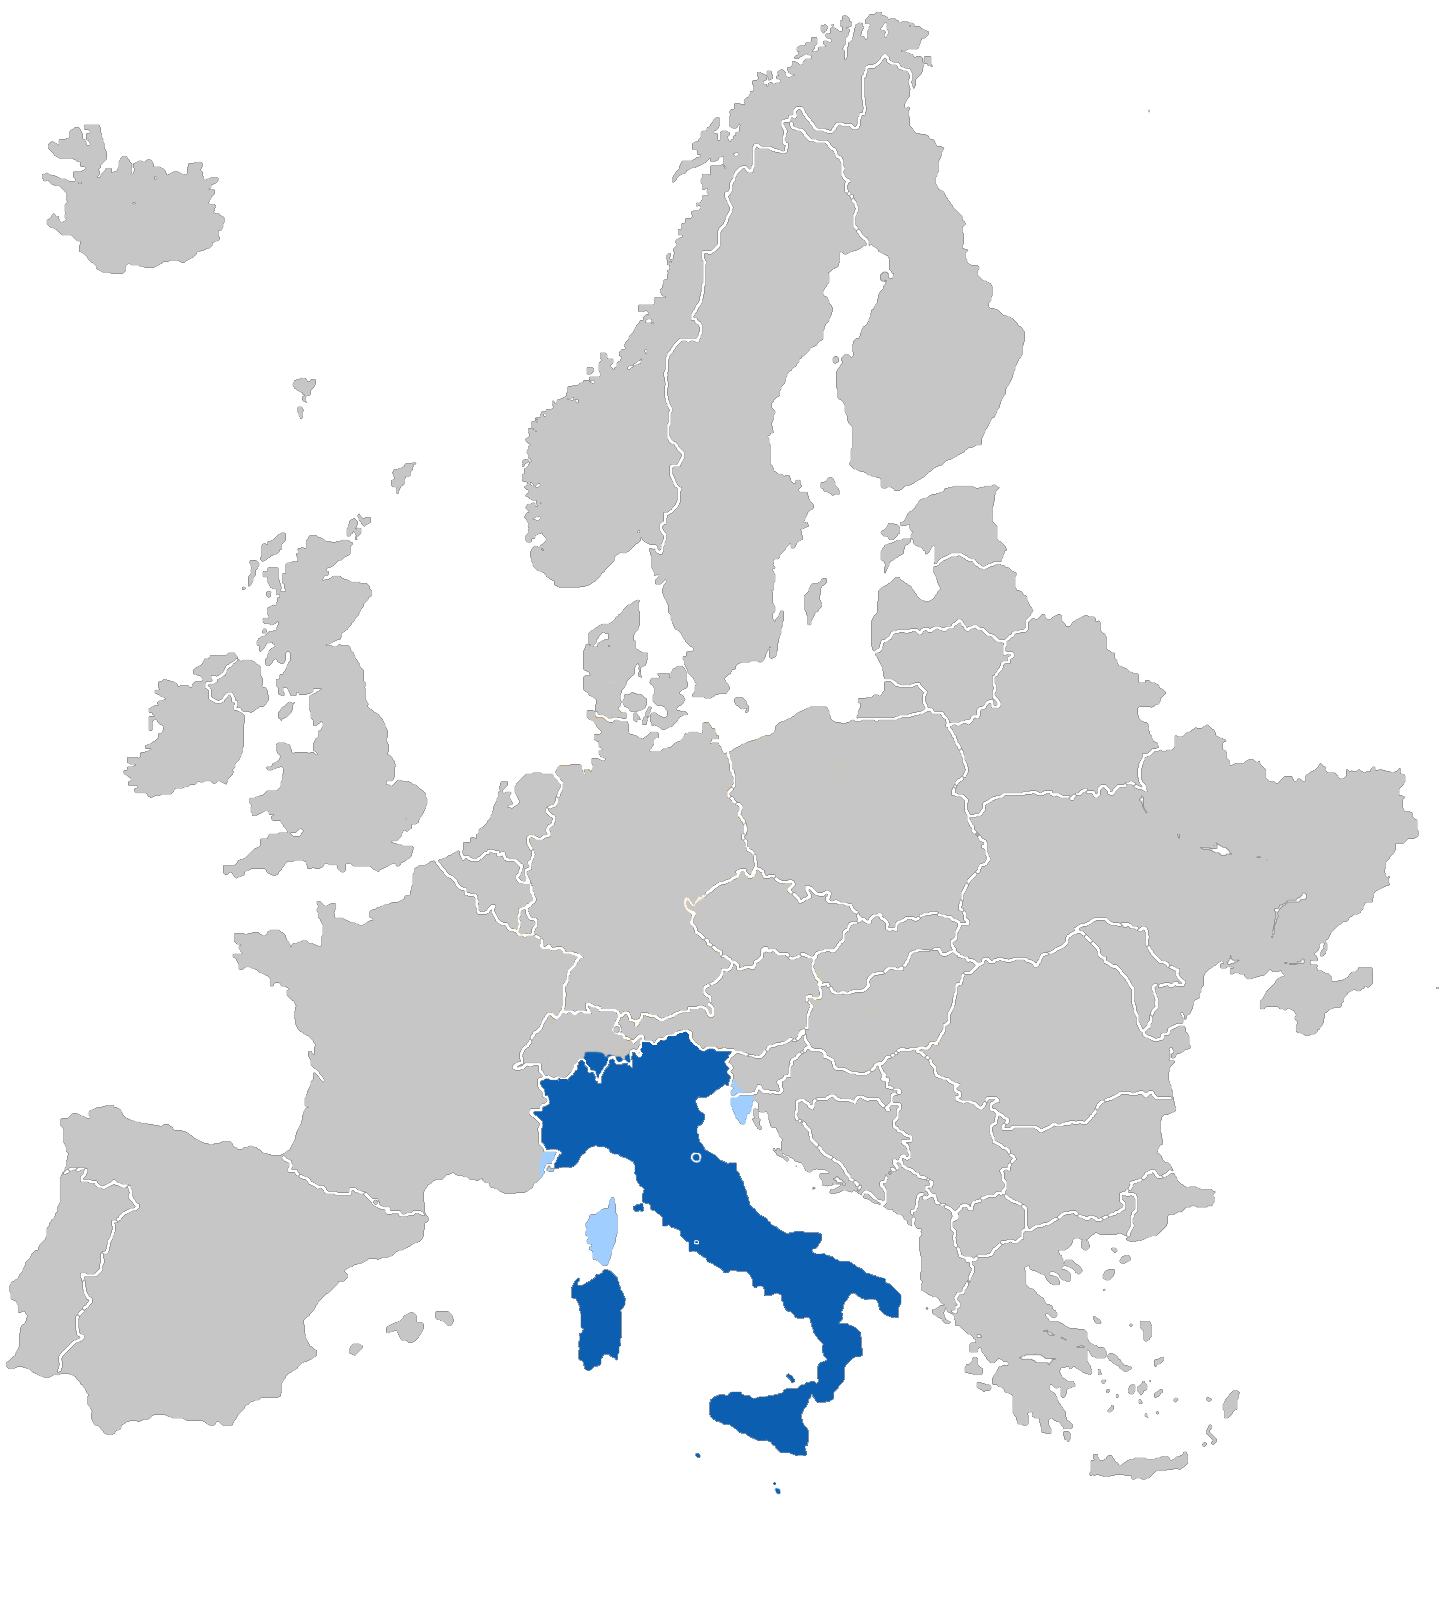 Map of europe clipart